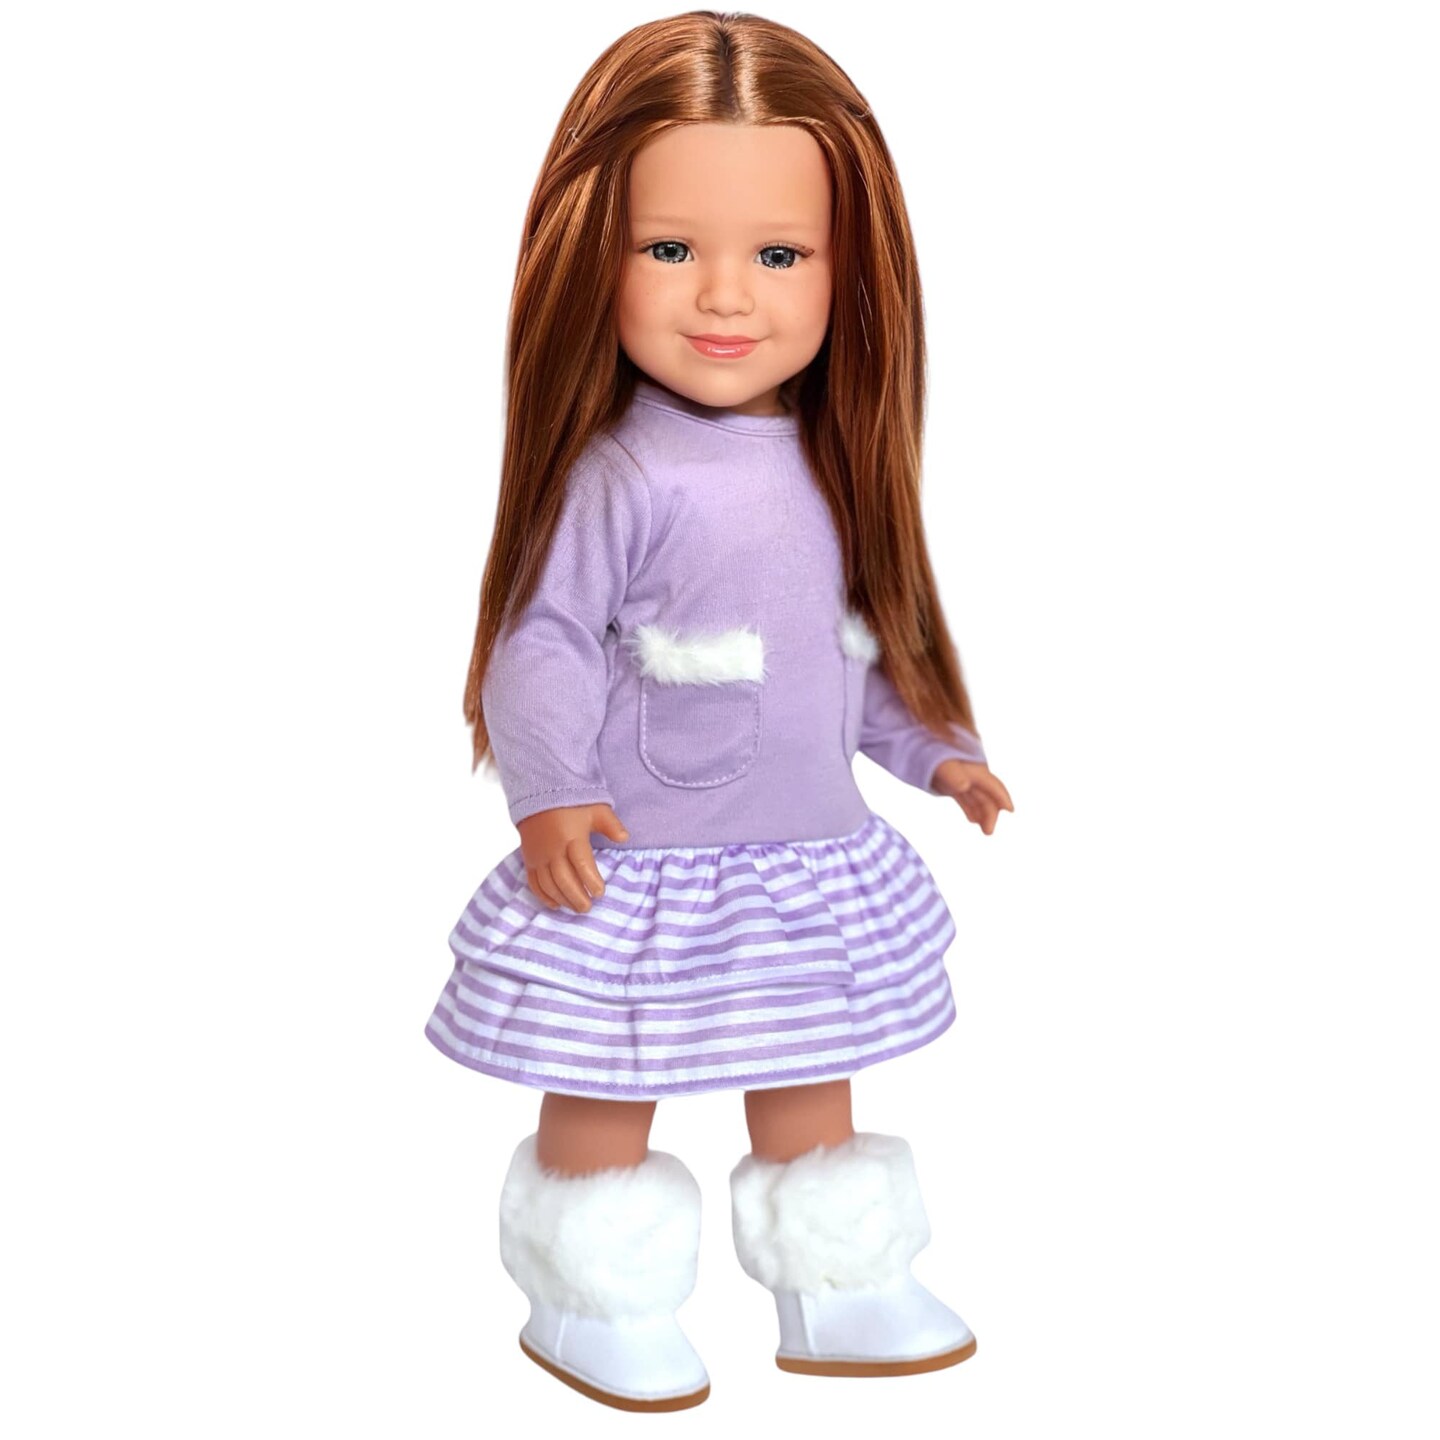 Rory: The Freckled Adventurous Doll with Fiery Red Hair